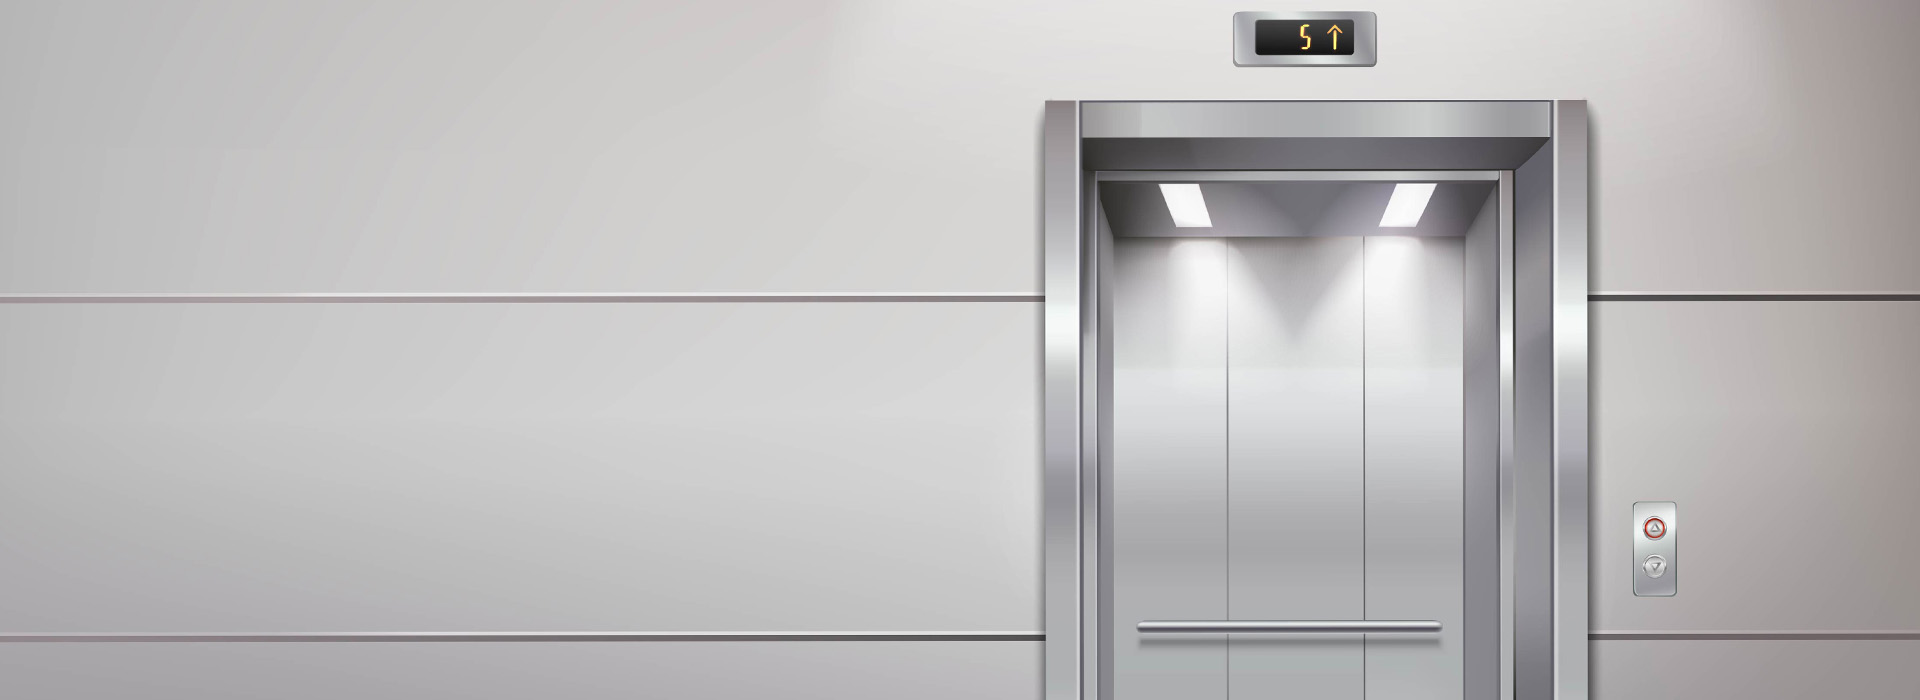 Protection After an Elevator Accident